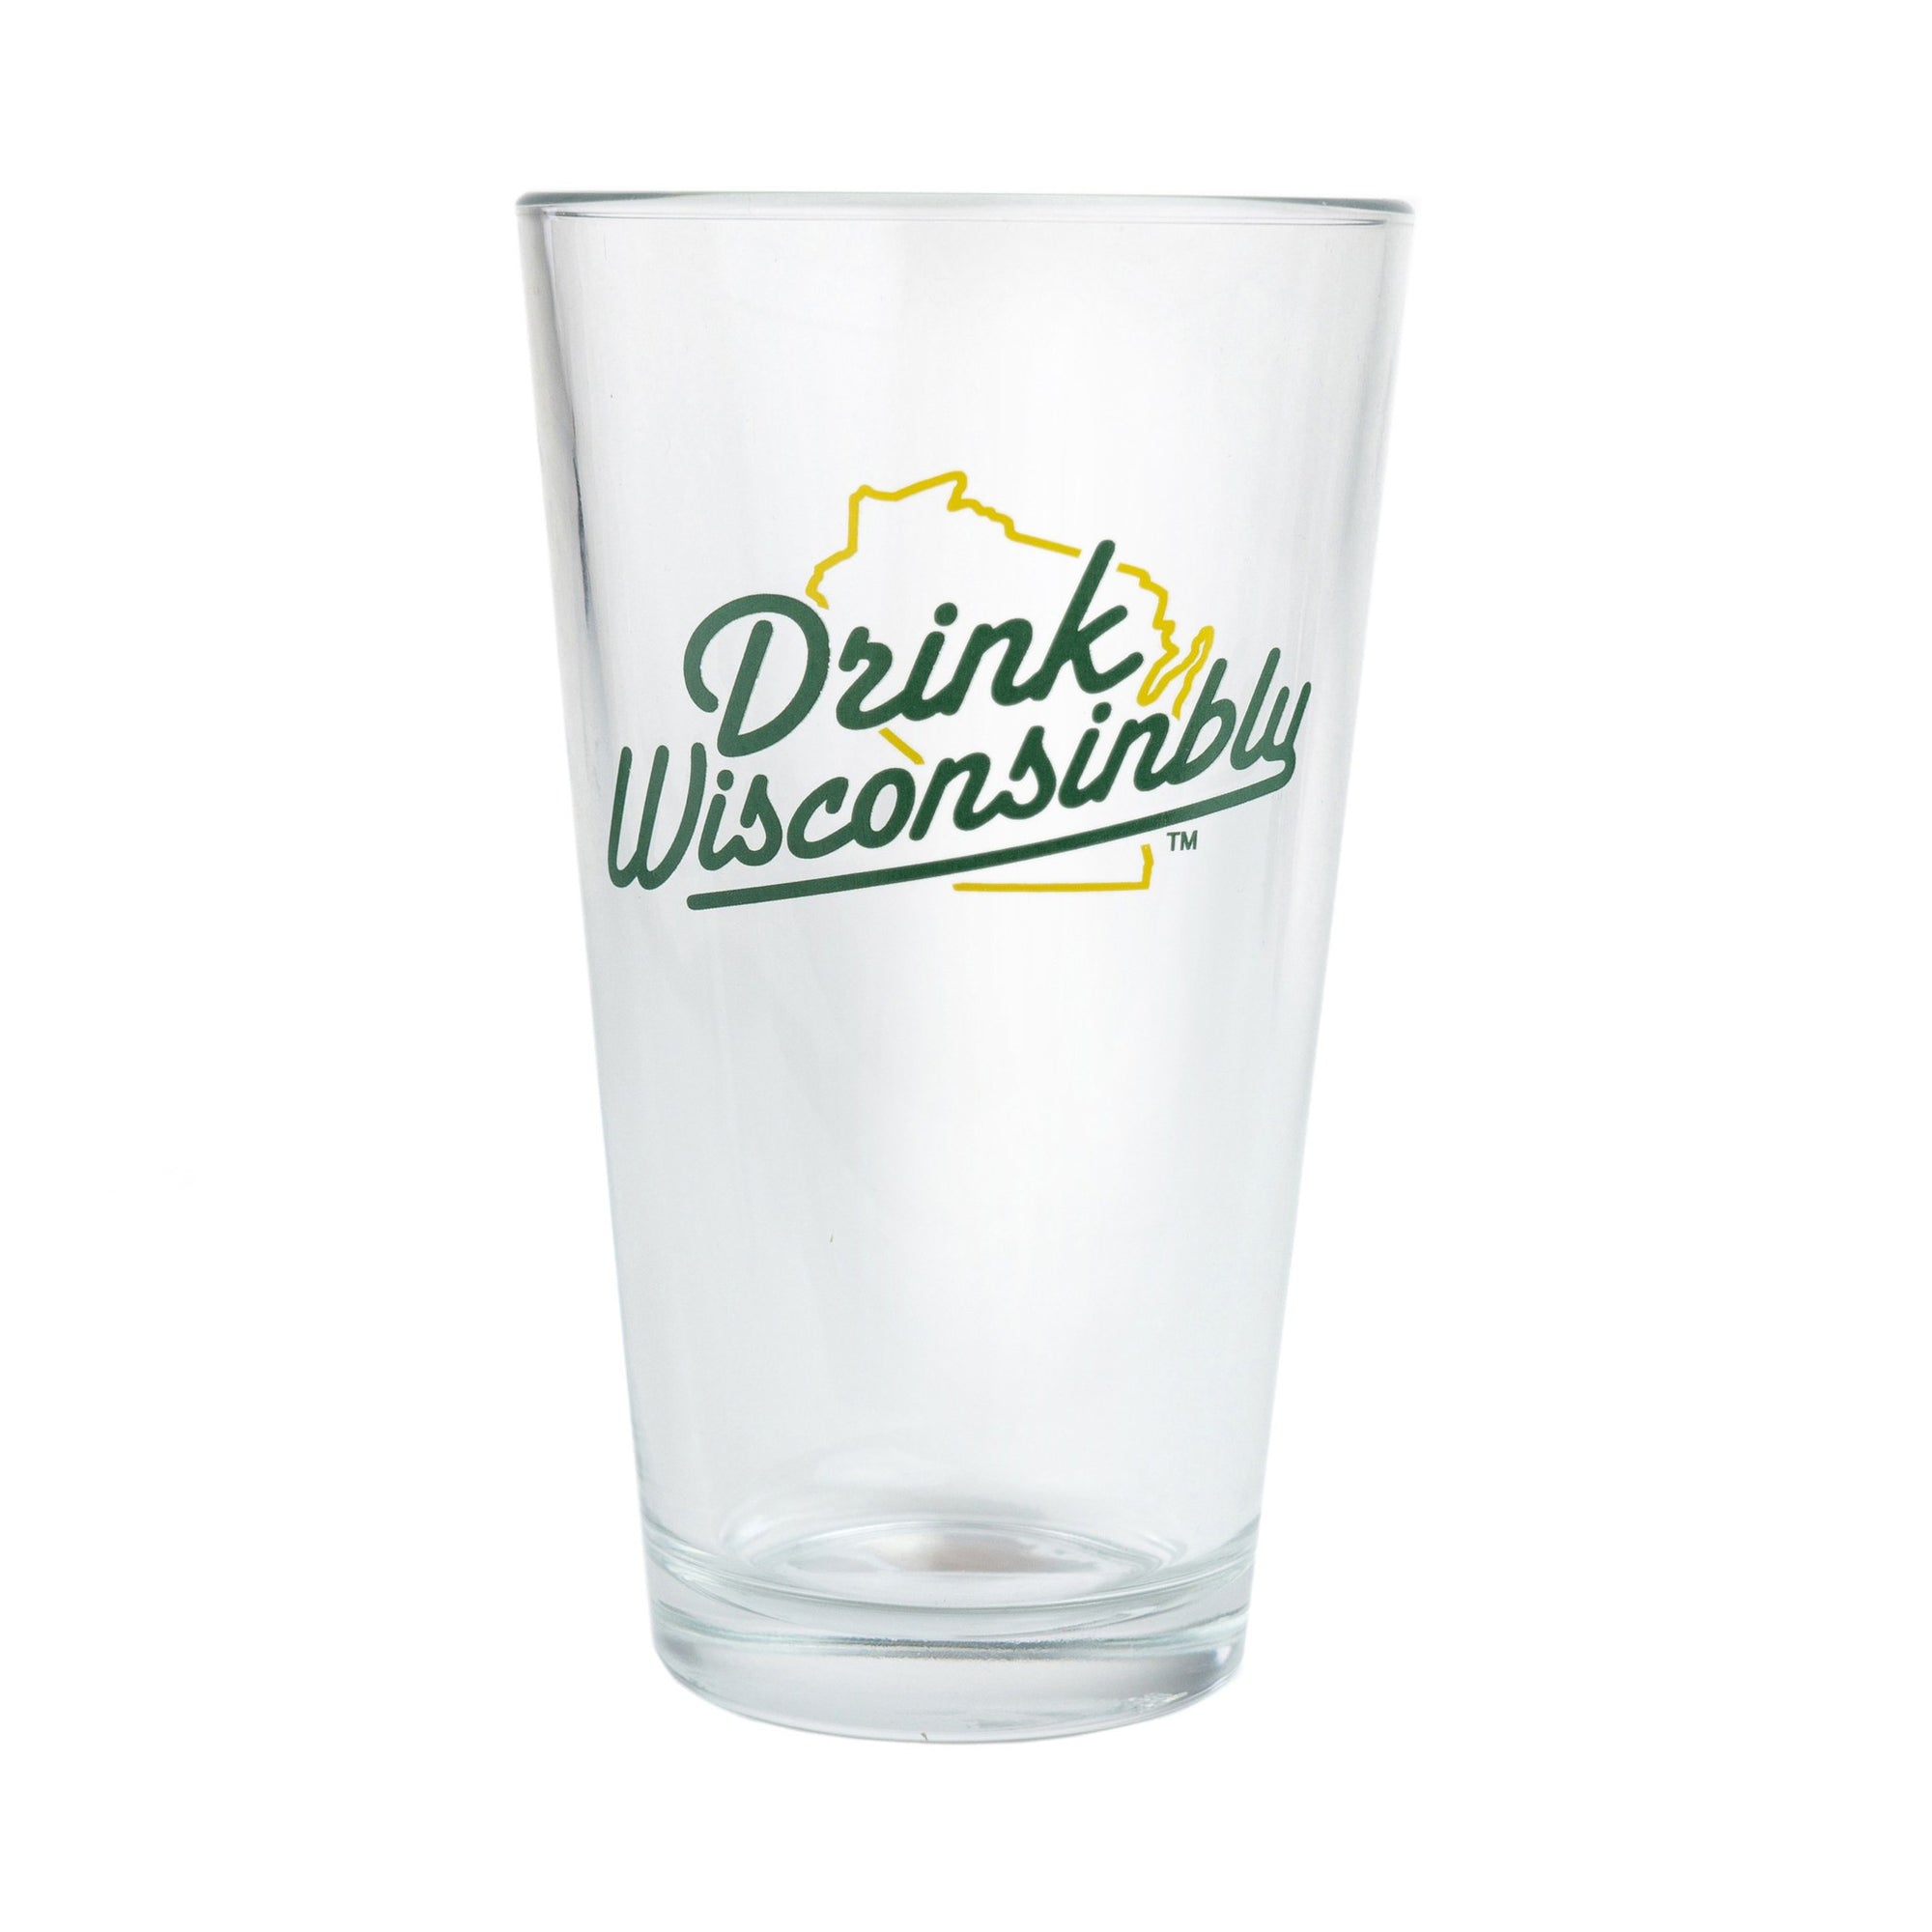 Drink Wisconsinbly Grand Chute Green Pint Glass